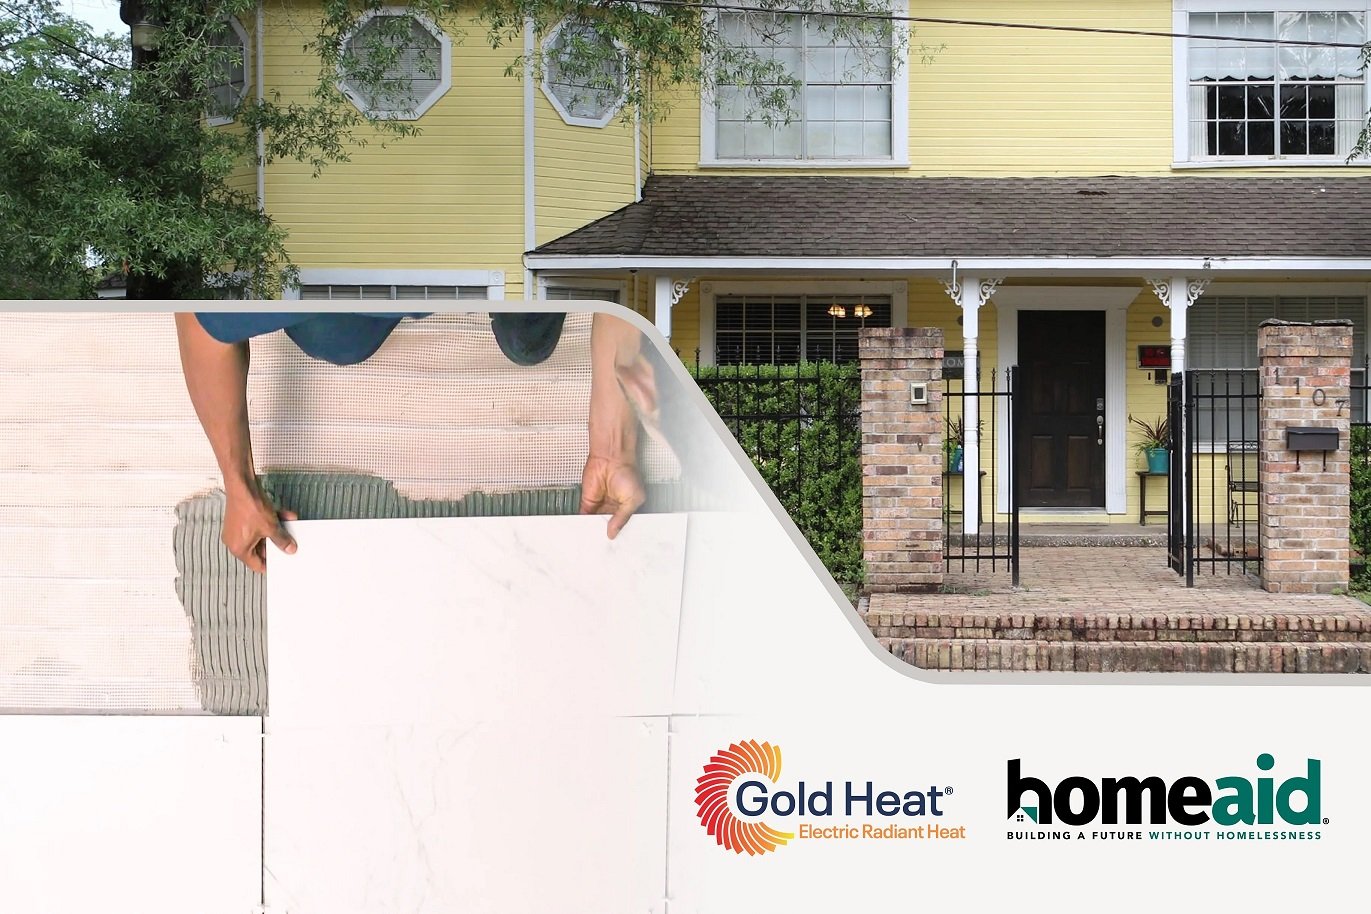 Gold Heat Announces Partnership with HomeAid